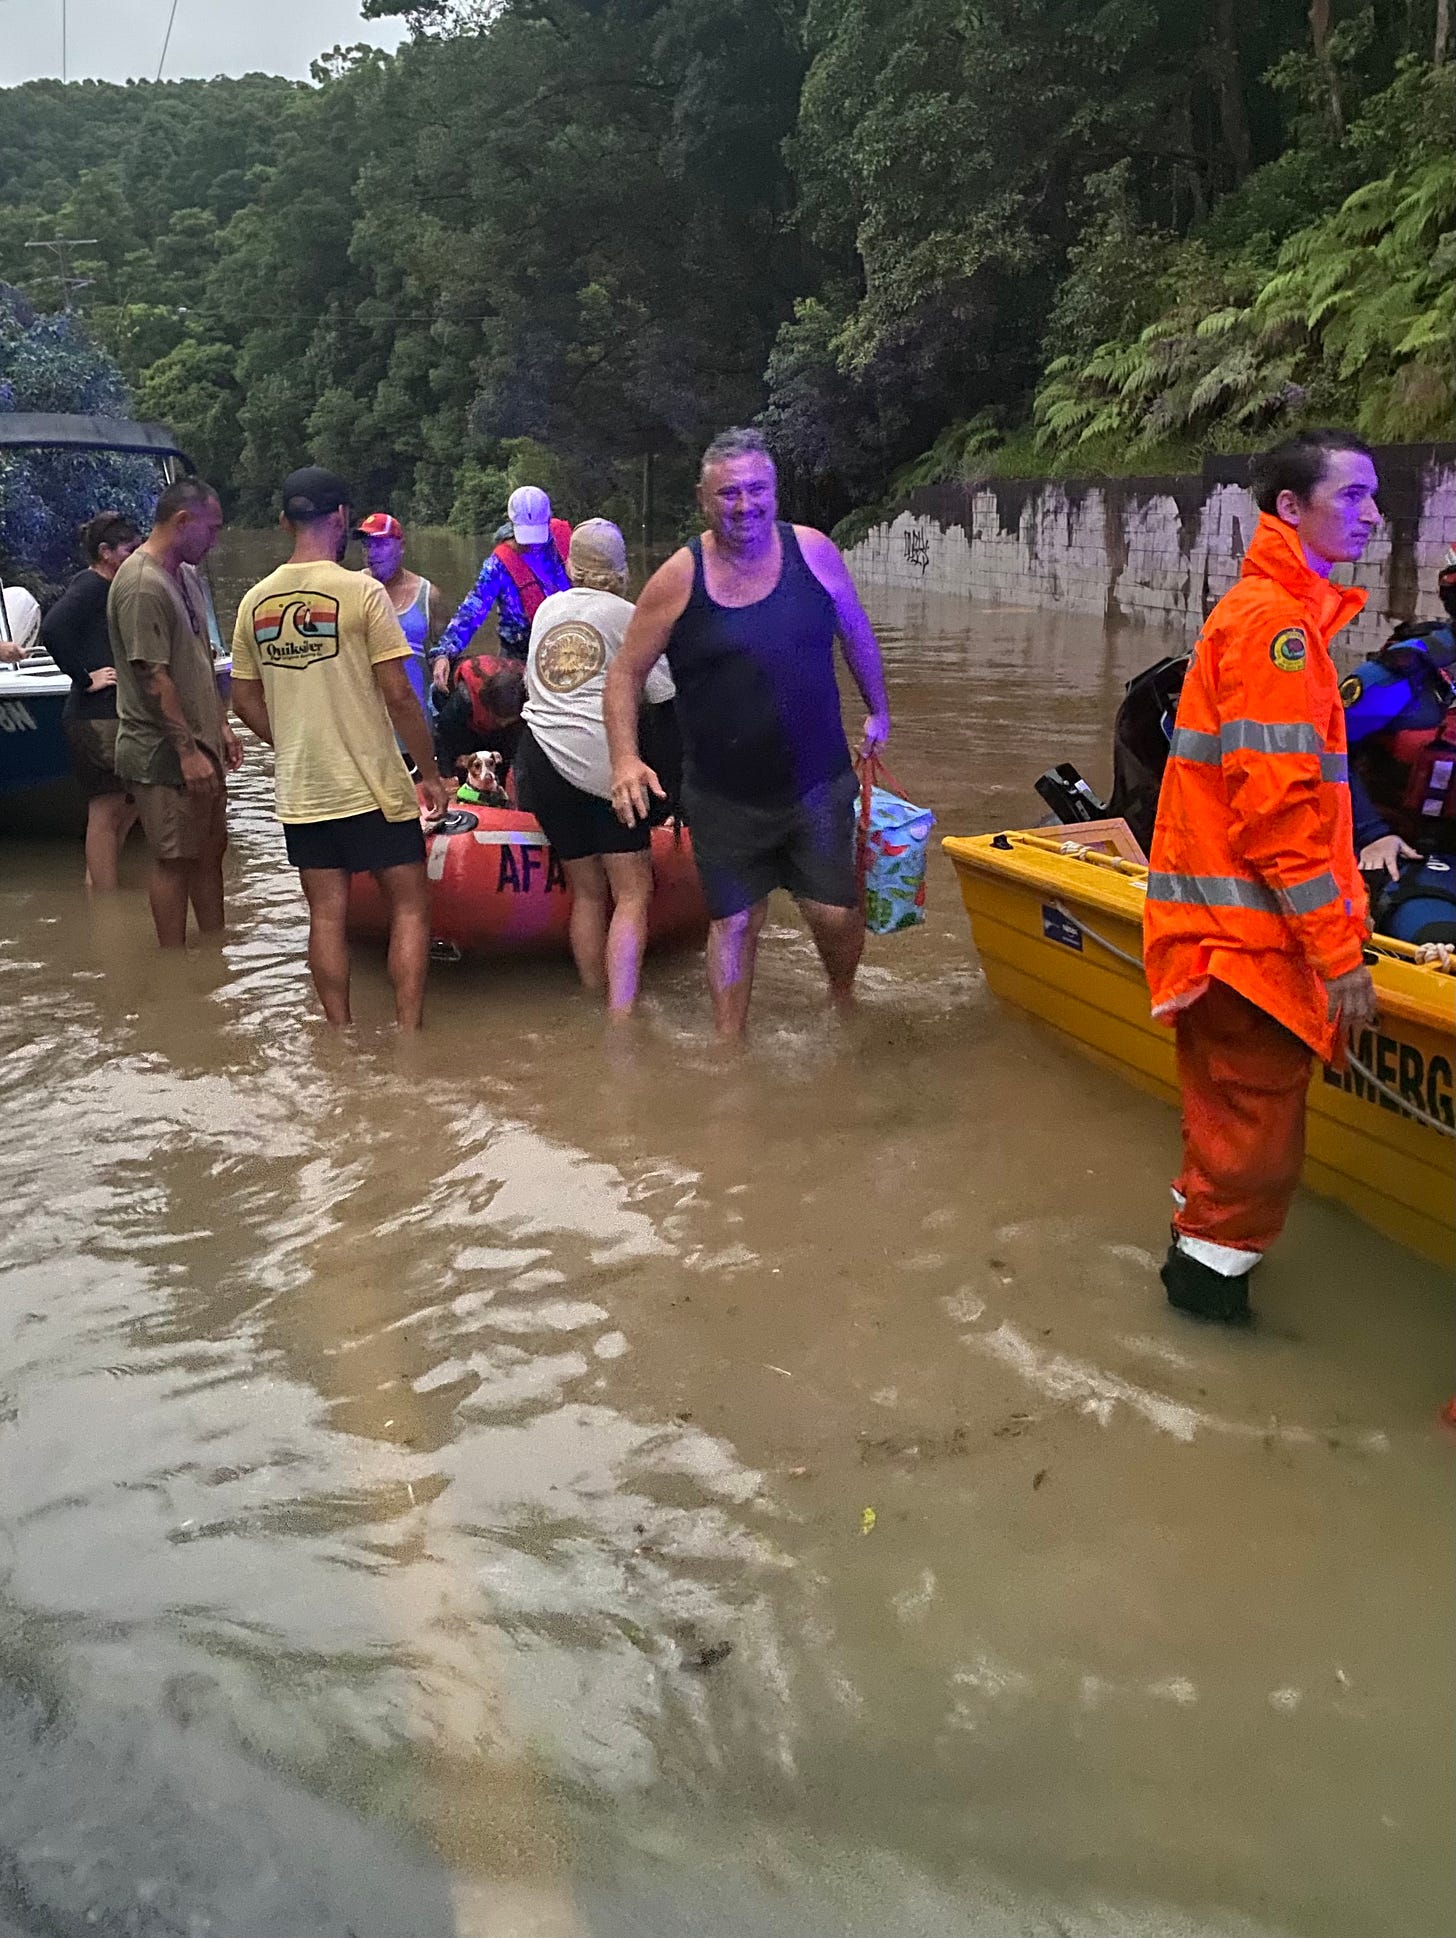 A man steps off a rescue dingy into flood water covering a road.